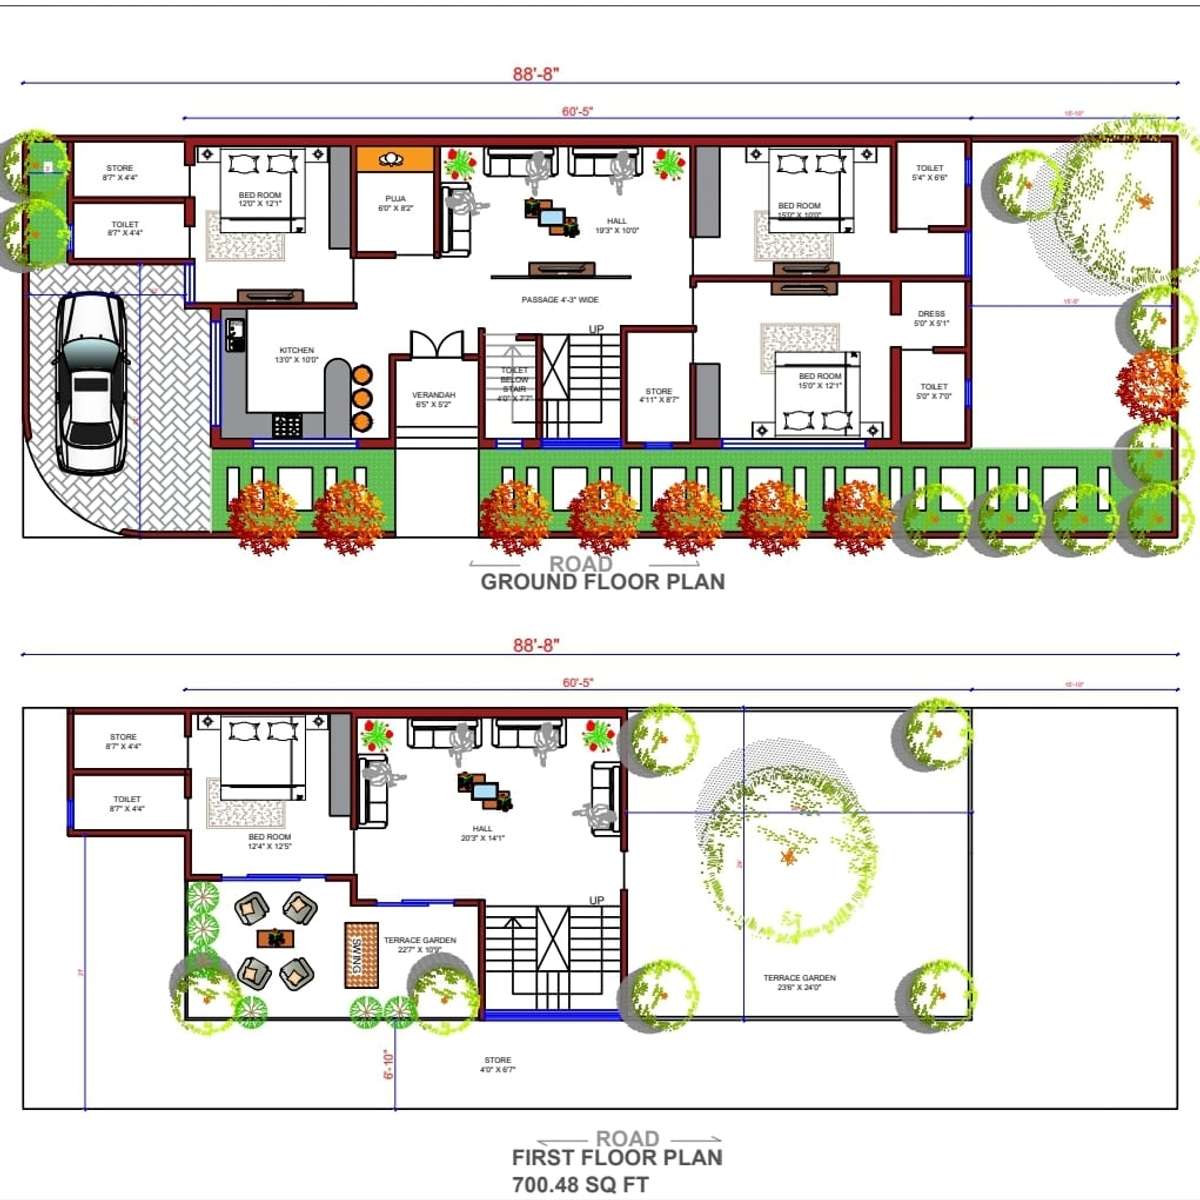 Designs by Architect Excellent Designs, Indore | Kolo